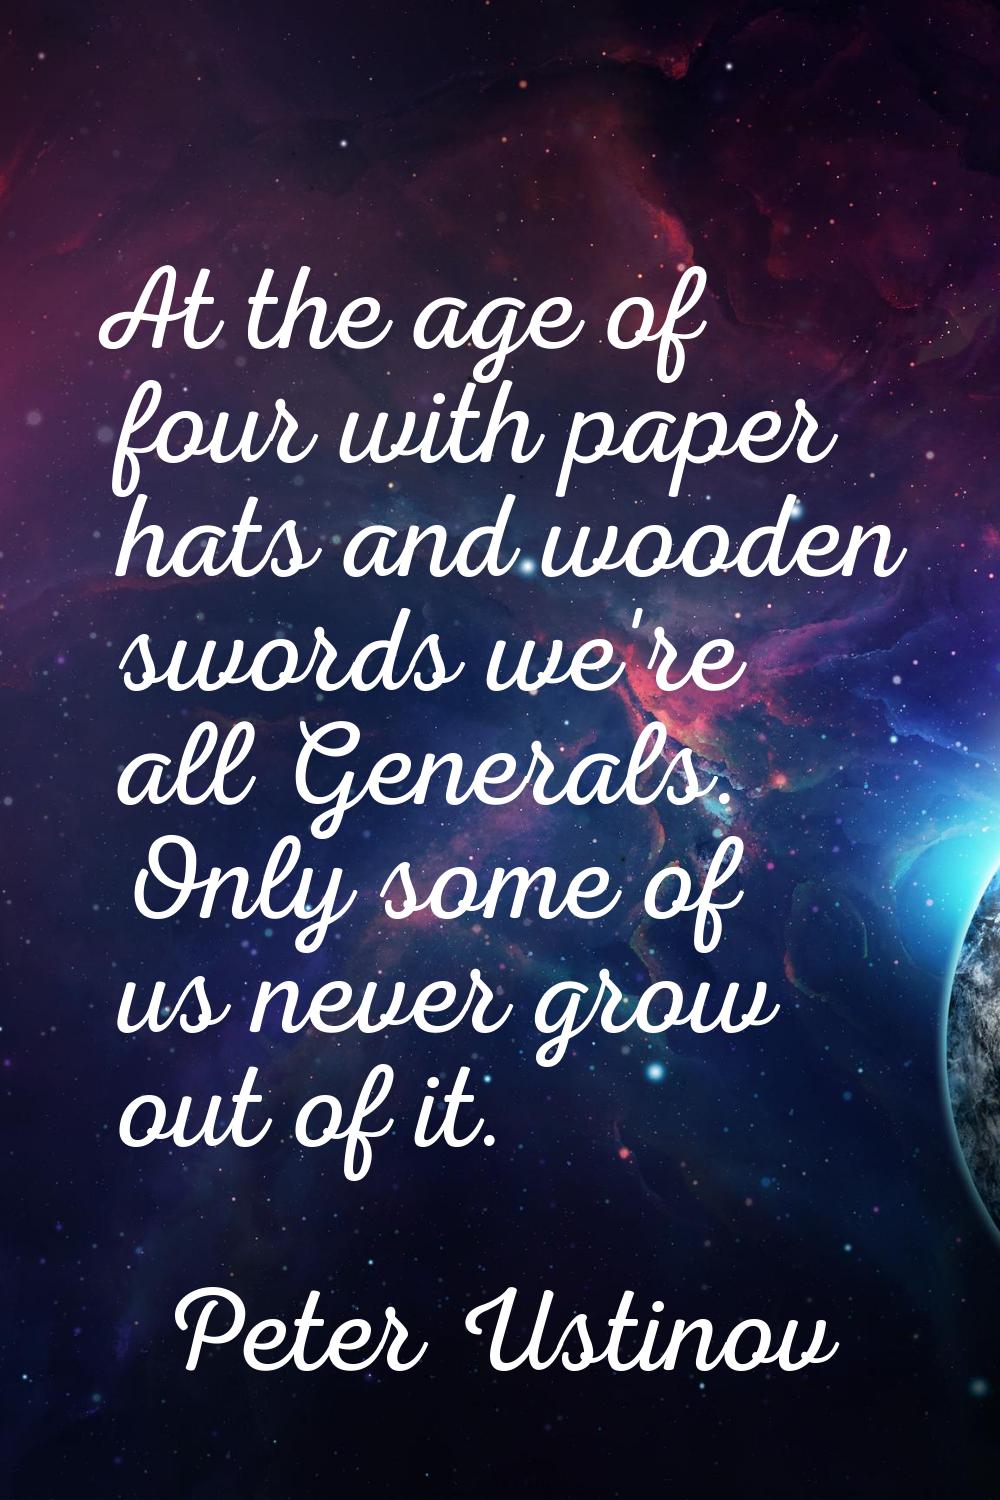 At the age of four with paper hats and wooden swords we're all Generals. Only some of us never grow